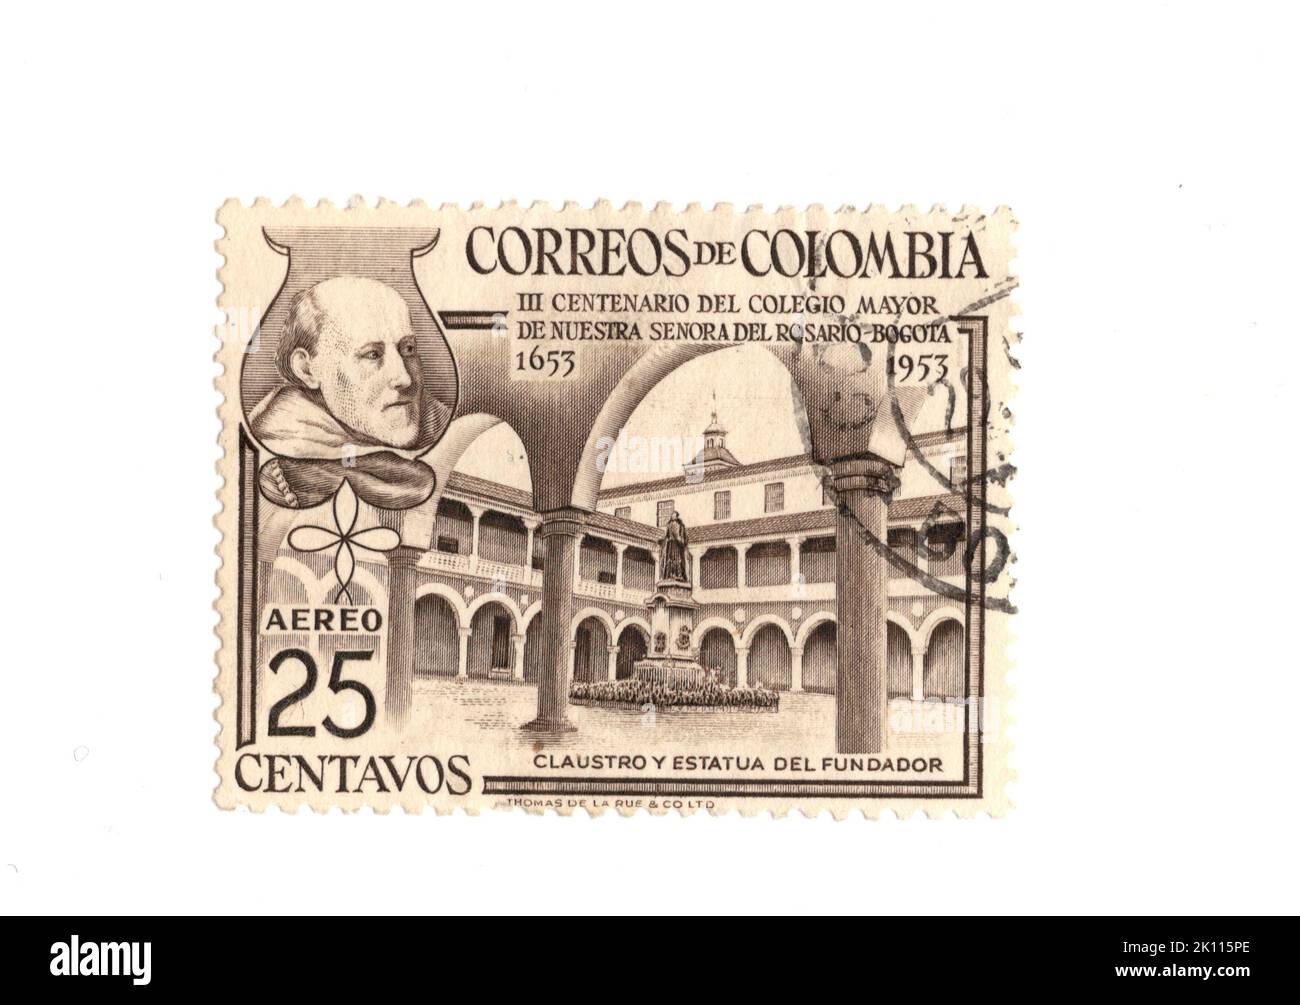 A vintage postage stamp from Colombia on a white background. Stock Photo